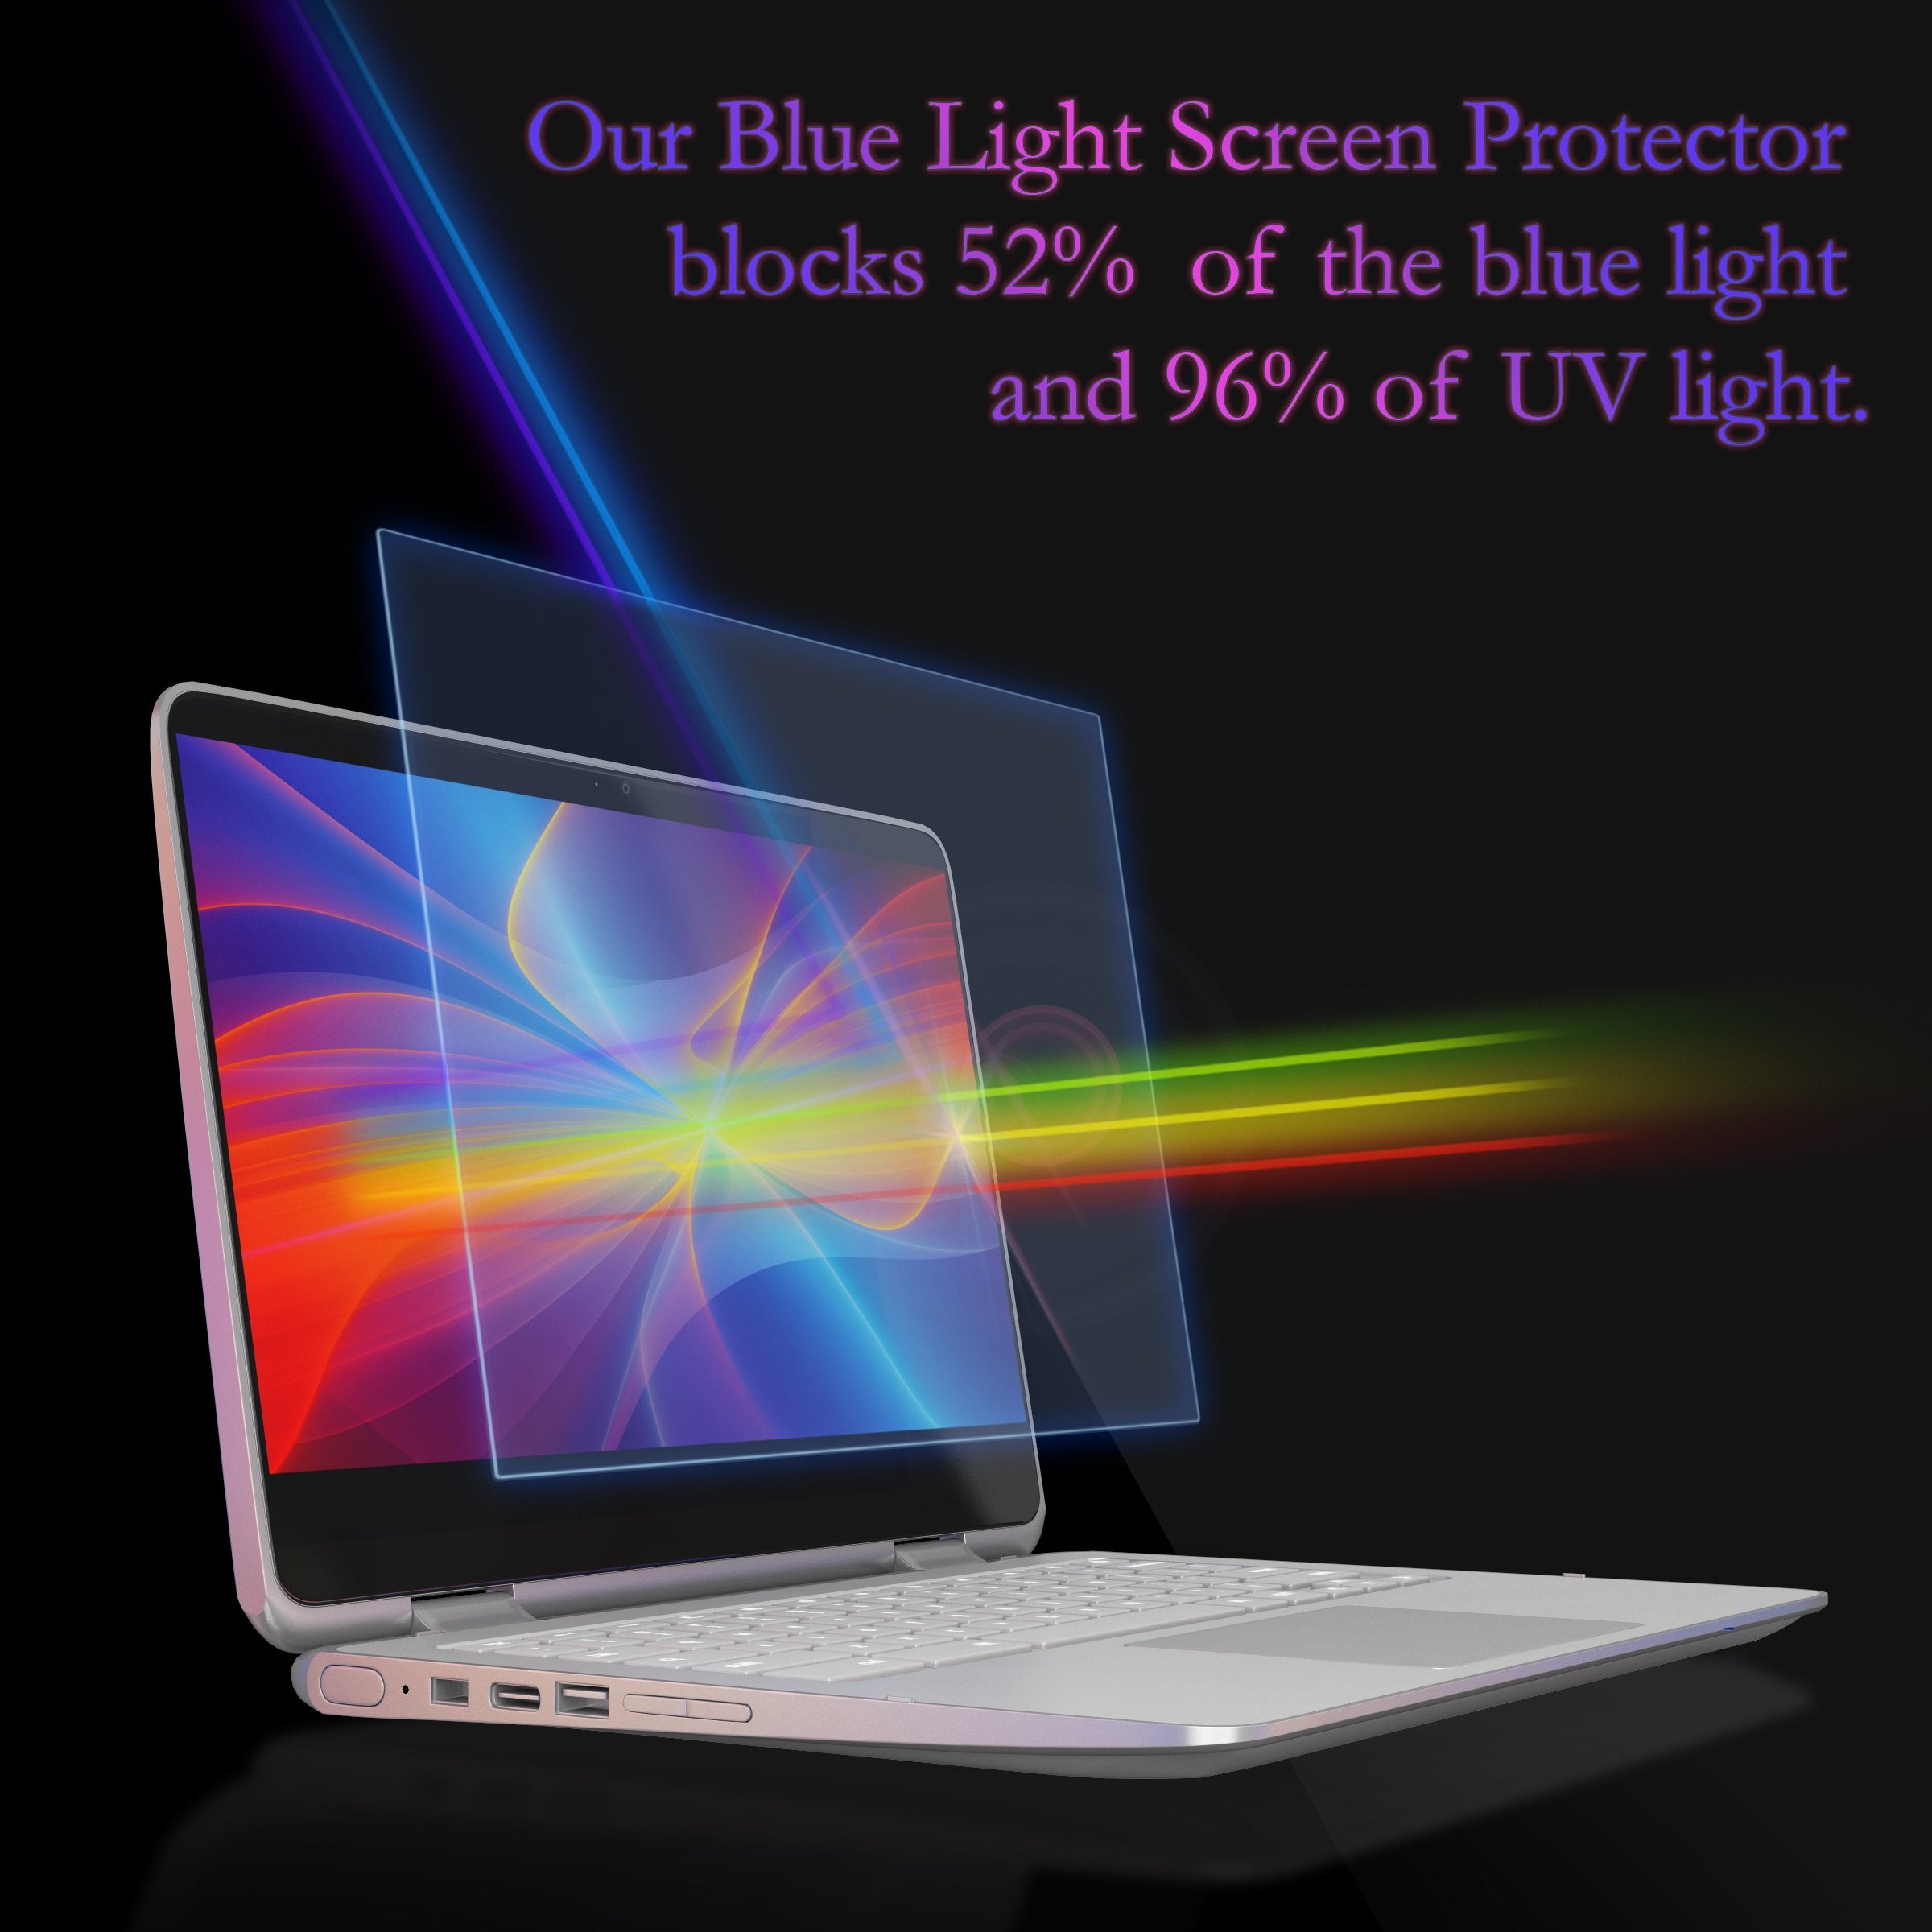 Anti Blue Light and Anti Glare Screen Protector (3 Pack) for Laptop. Filter Out Blue Light and Relieve Computer Eye Strain to Help You Sleep Better